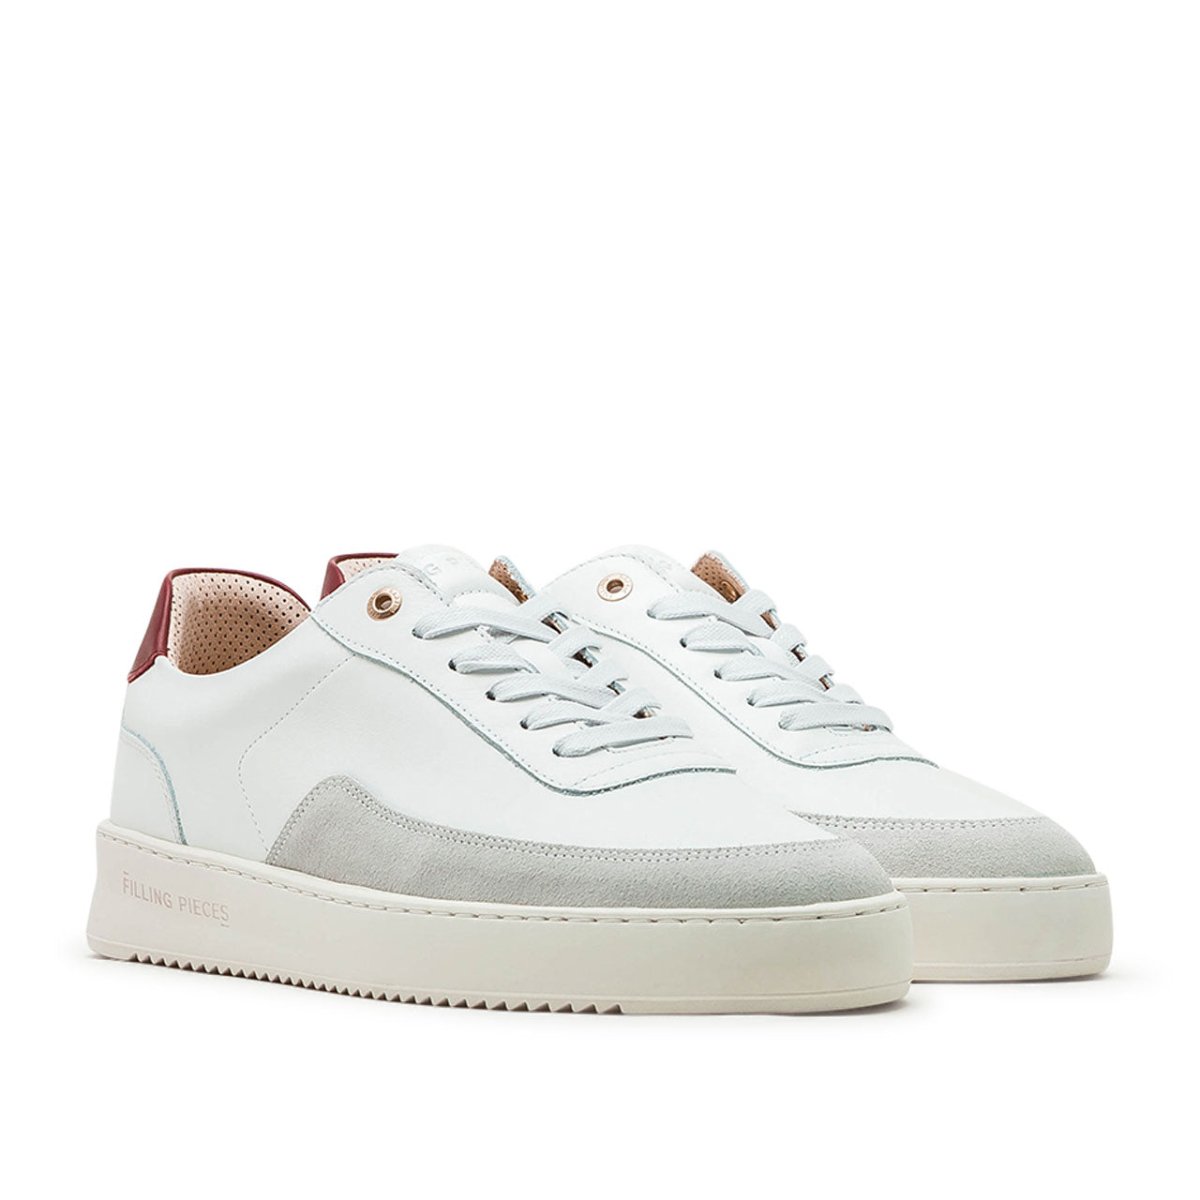 Filling Pieces Mondo Squash (Weiß / Rot)  - Allike Store